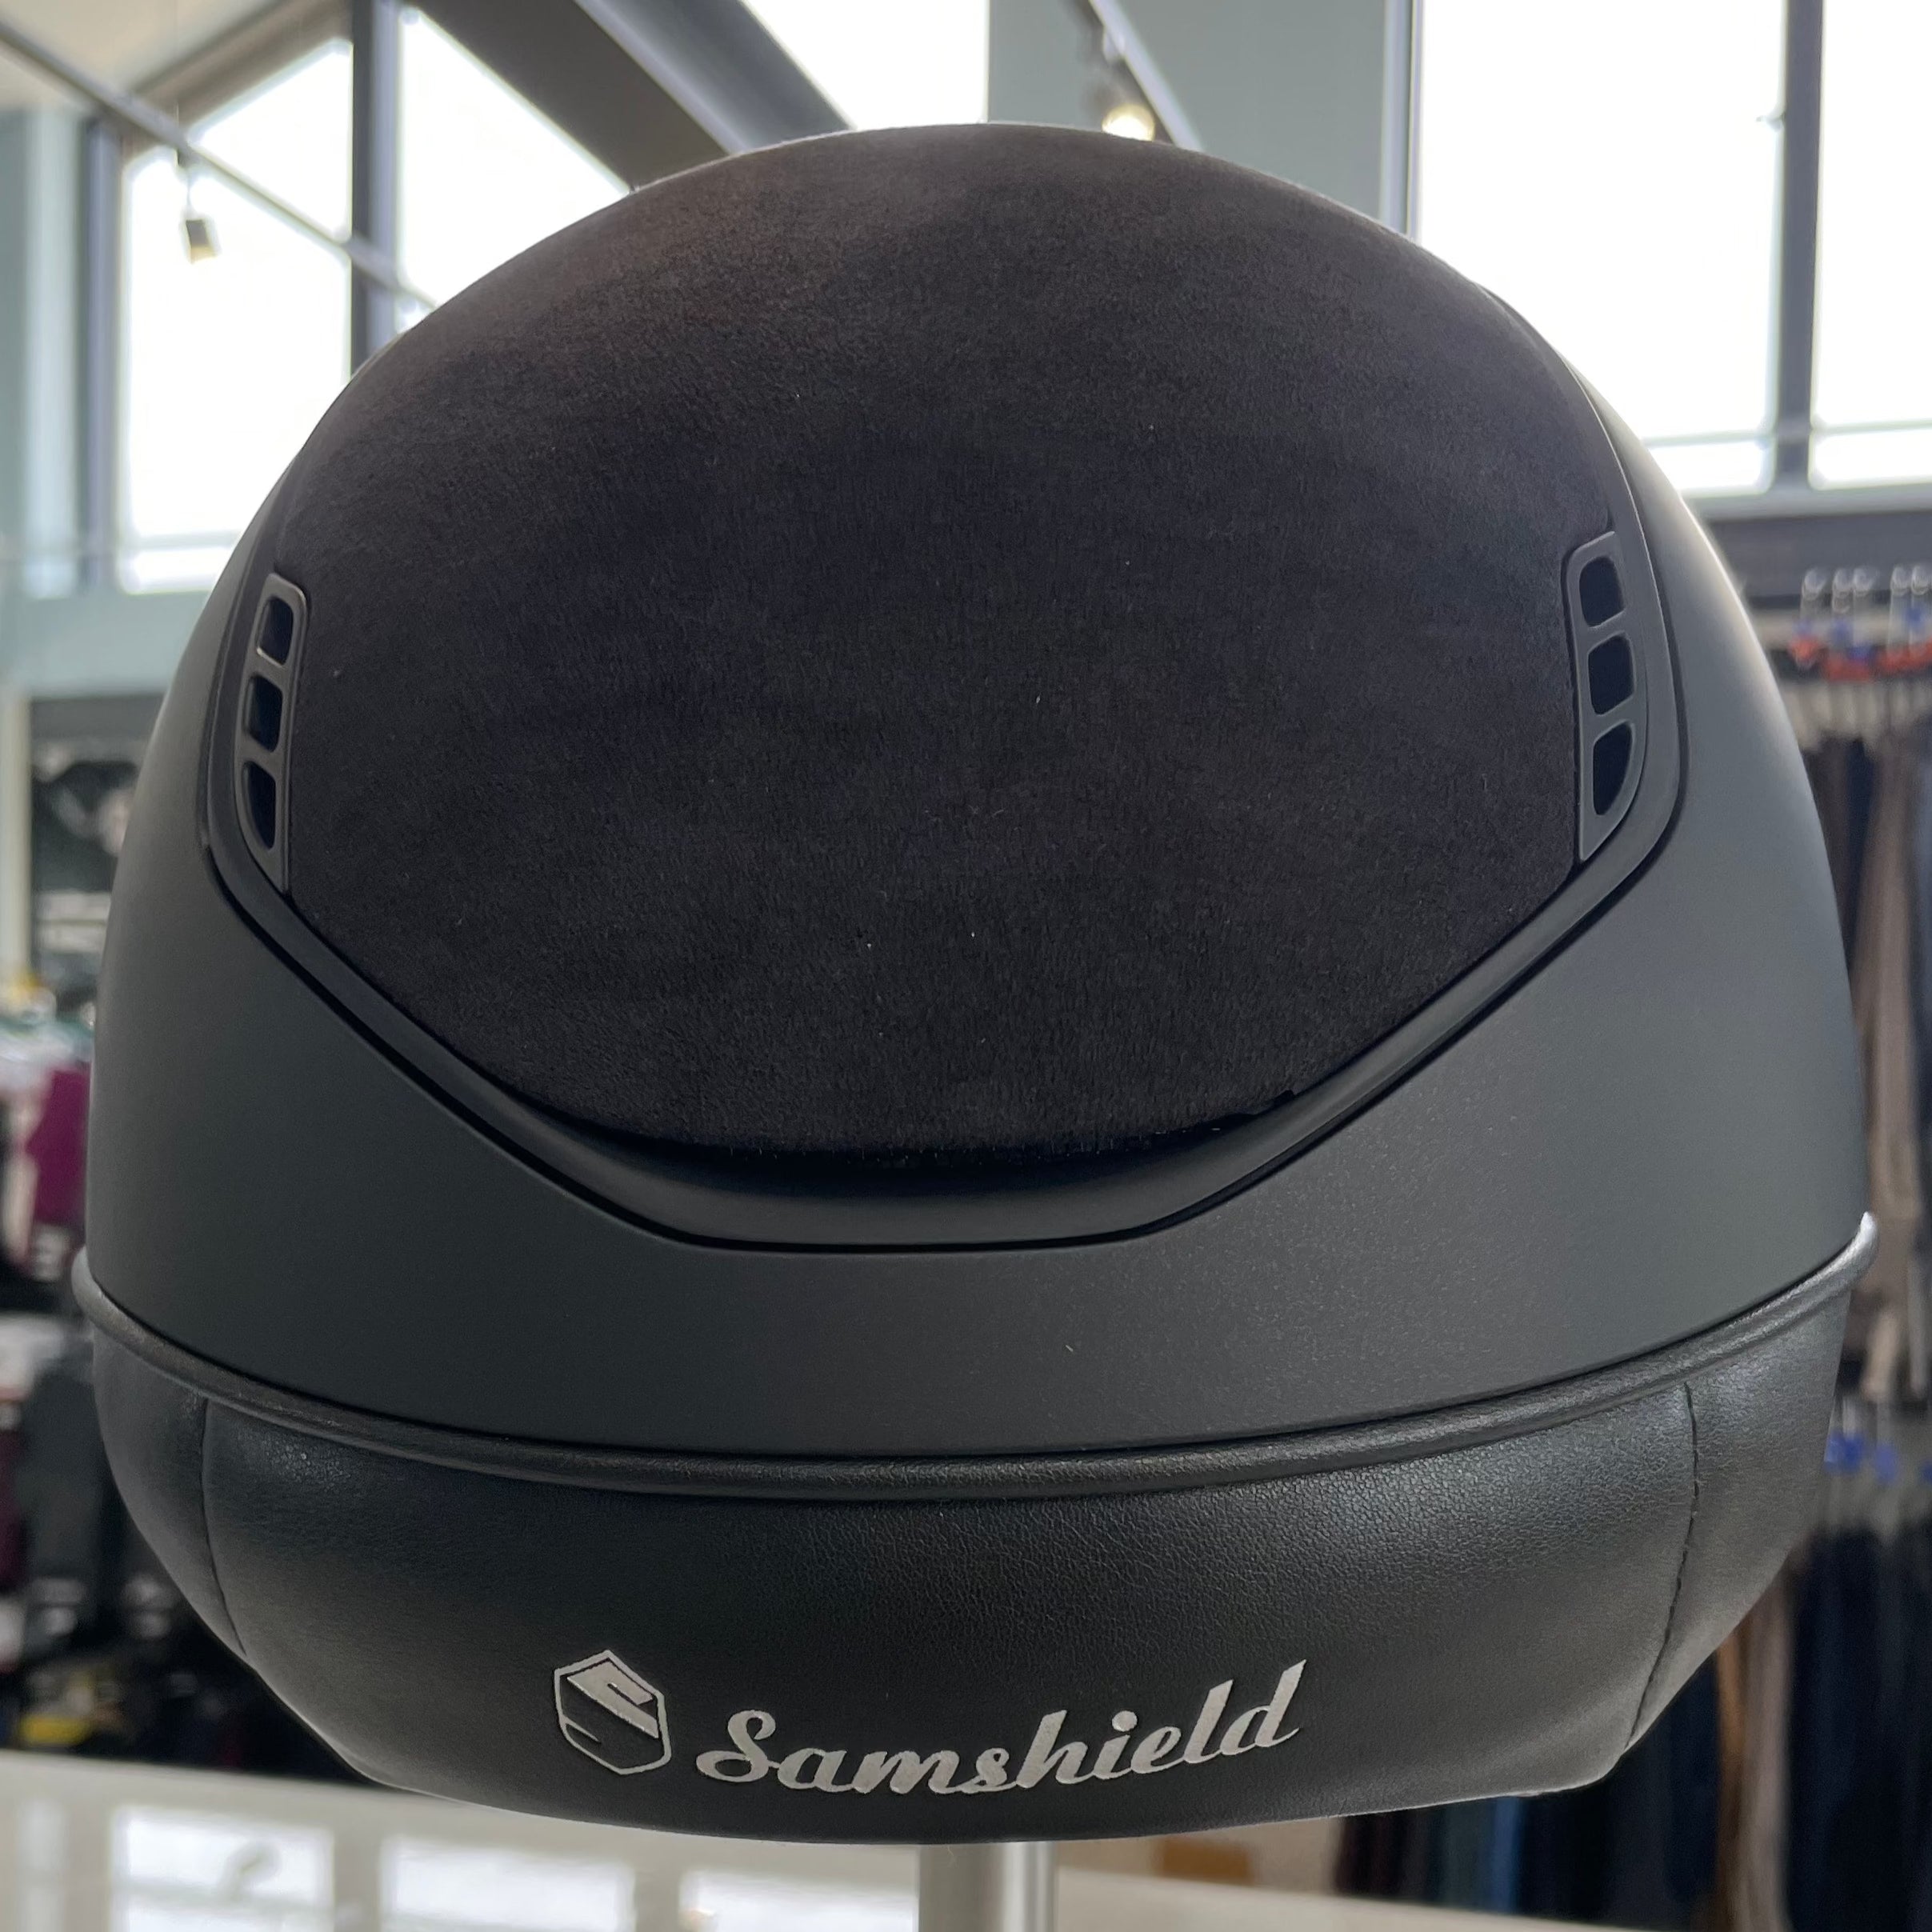 Samshield MissShield 2.0 Black, matt black with alcantara top and frontal band and 5 front crystals (medium&large) - in stock and ready to ship!